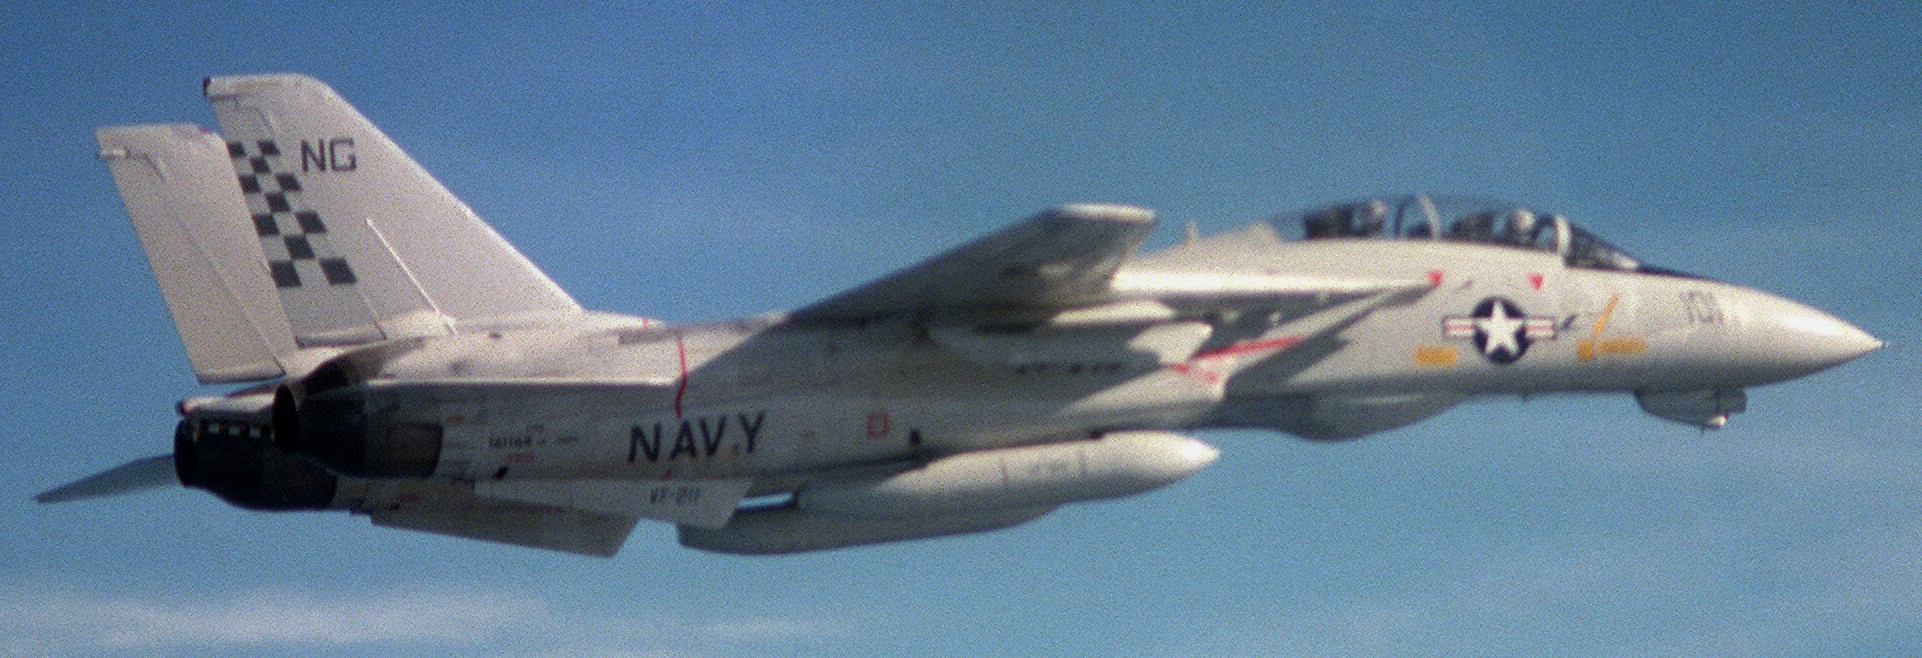 vf-211 fighting checkmates fighter squadron f-14a tomcat us navy carrier air wing cvw-9 uss kitty hawk cv-63 79